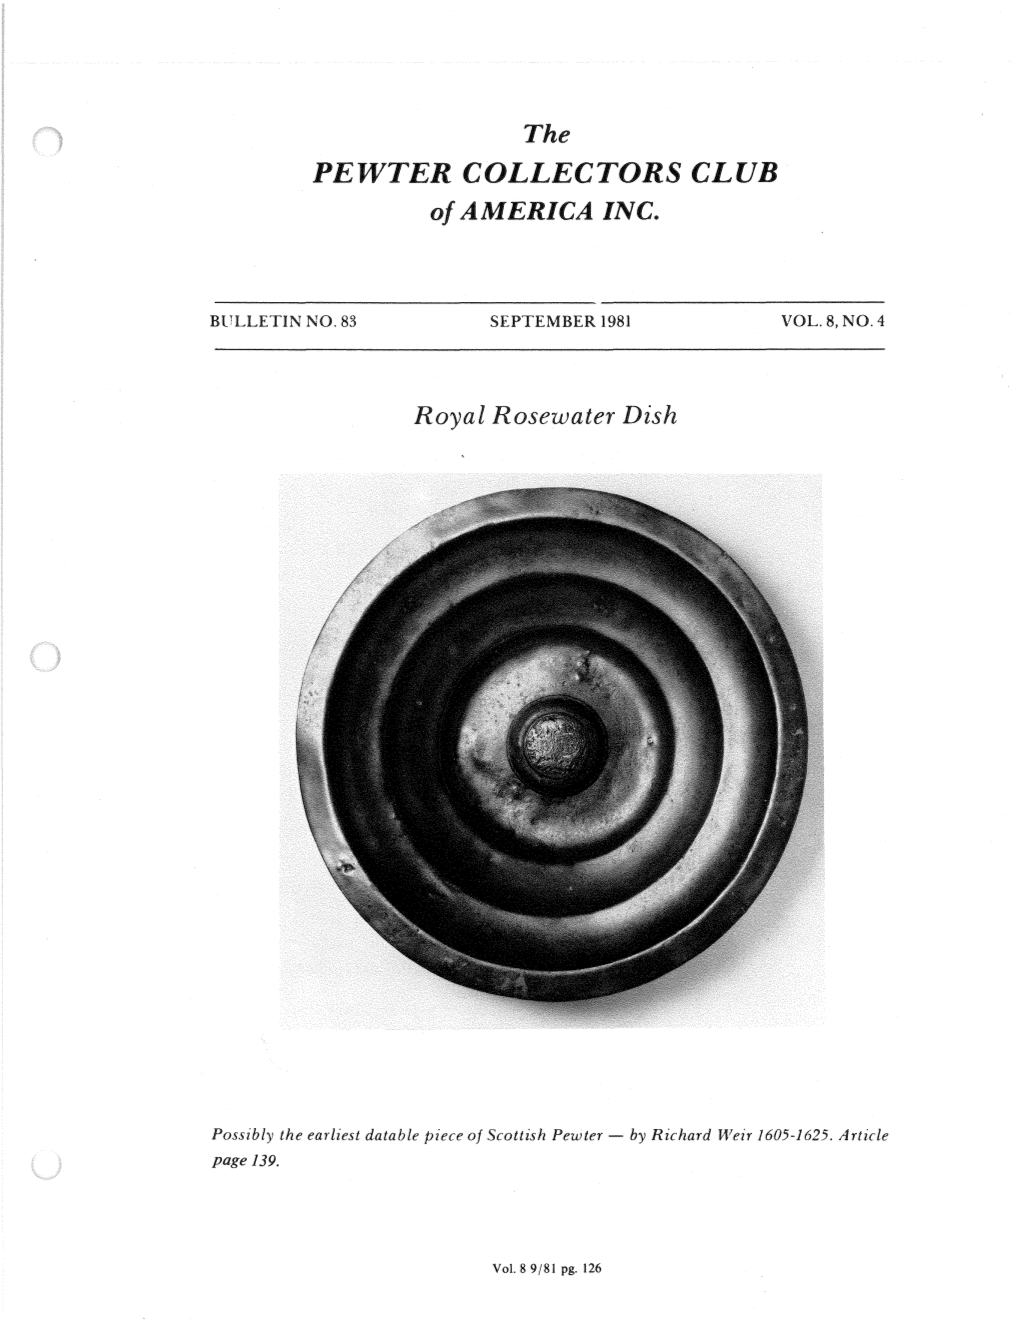 PEWTER COLLECTORS CLUB of AMERICA INC